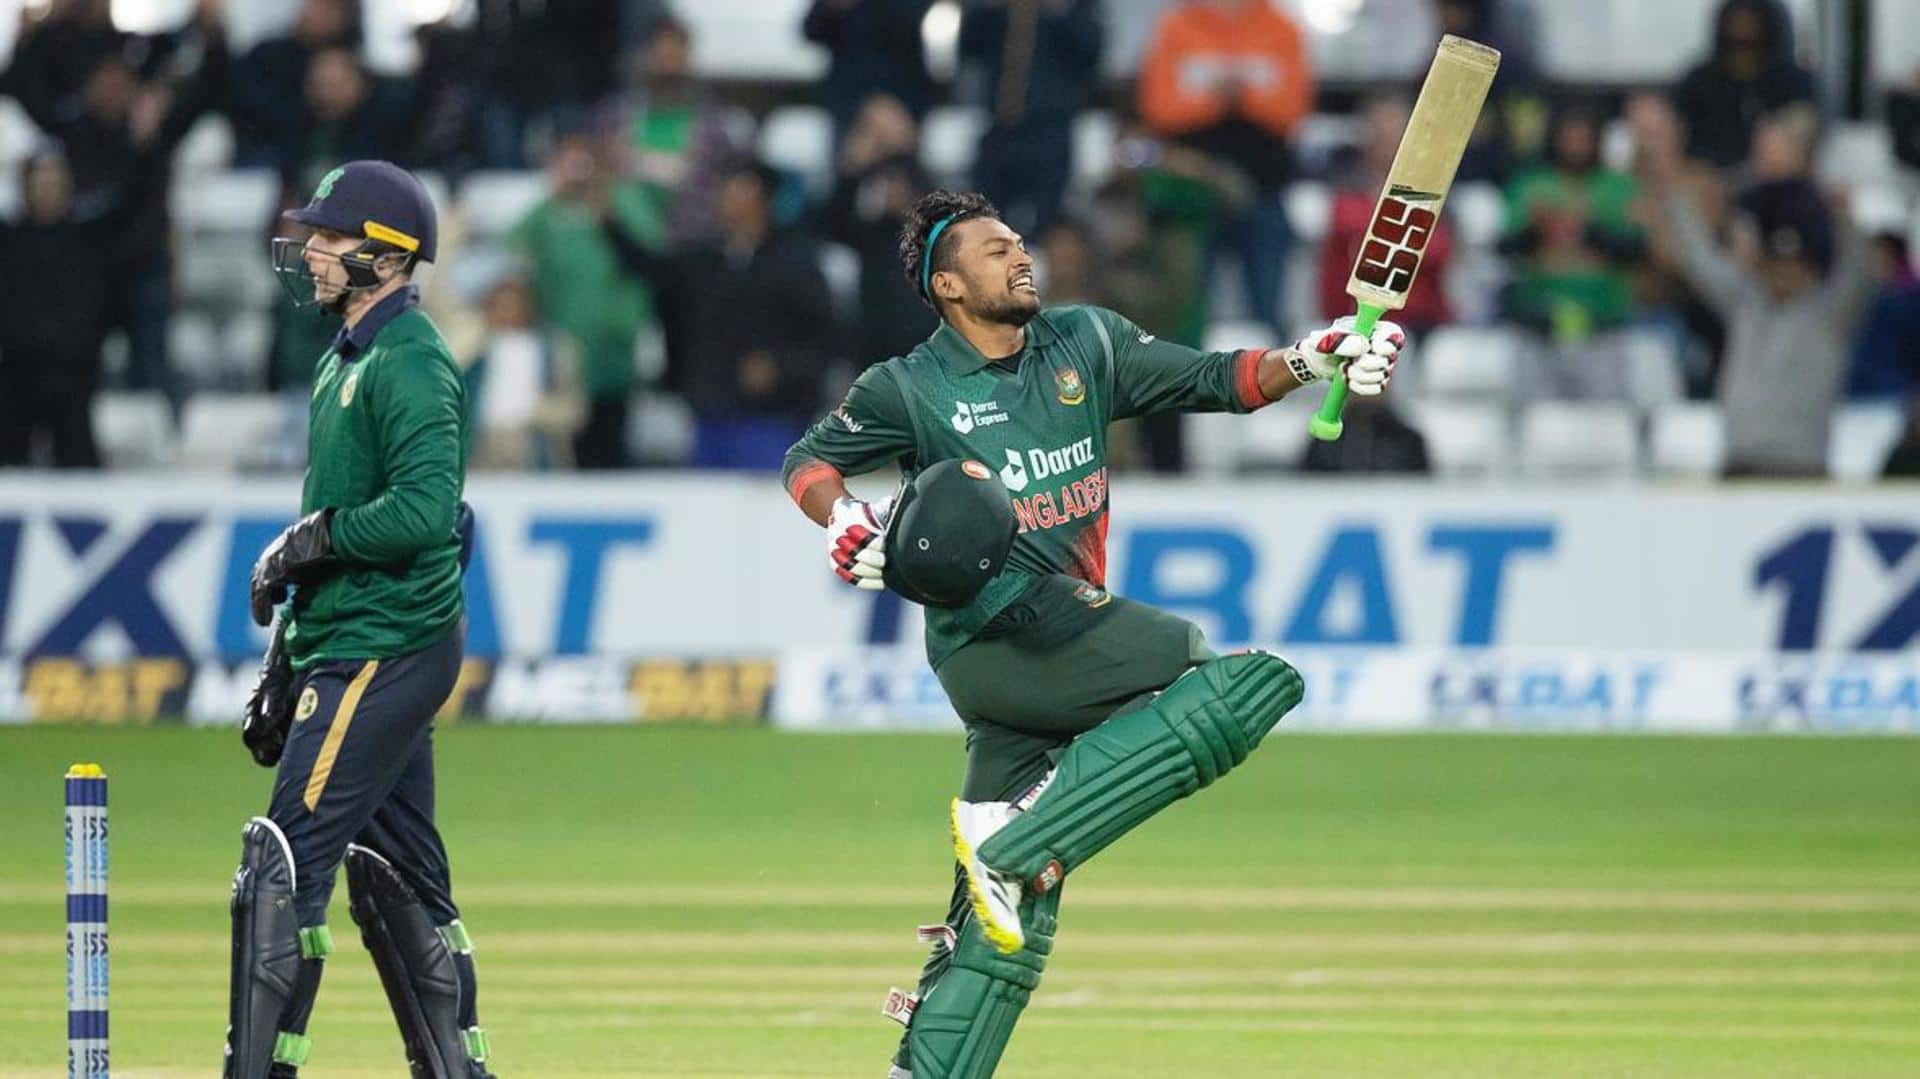 Bangladesh come from behind to beat Ireland in 2nd ODI